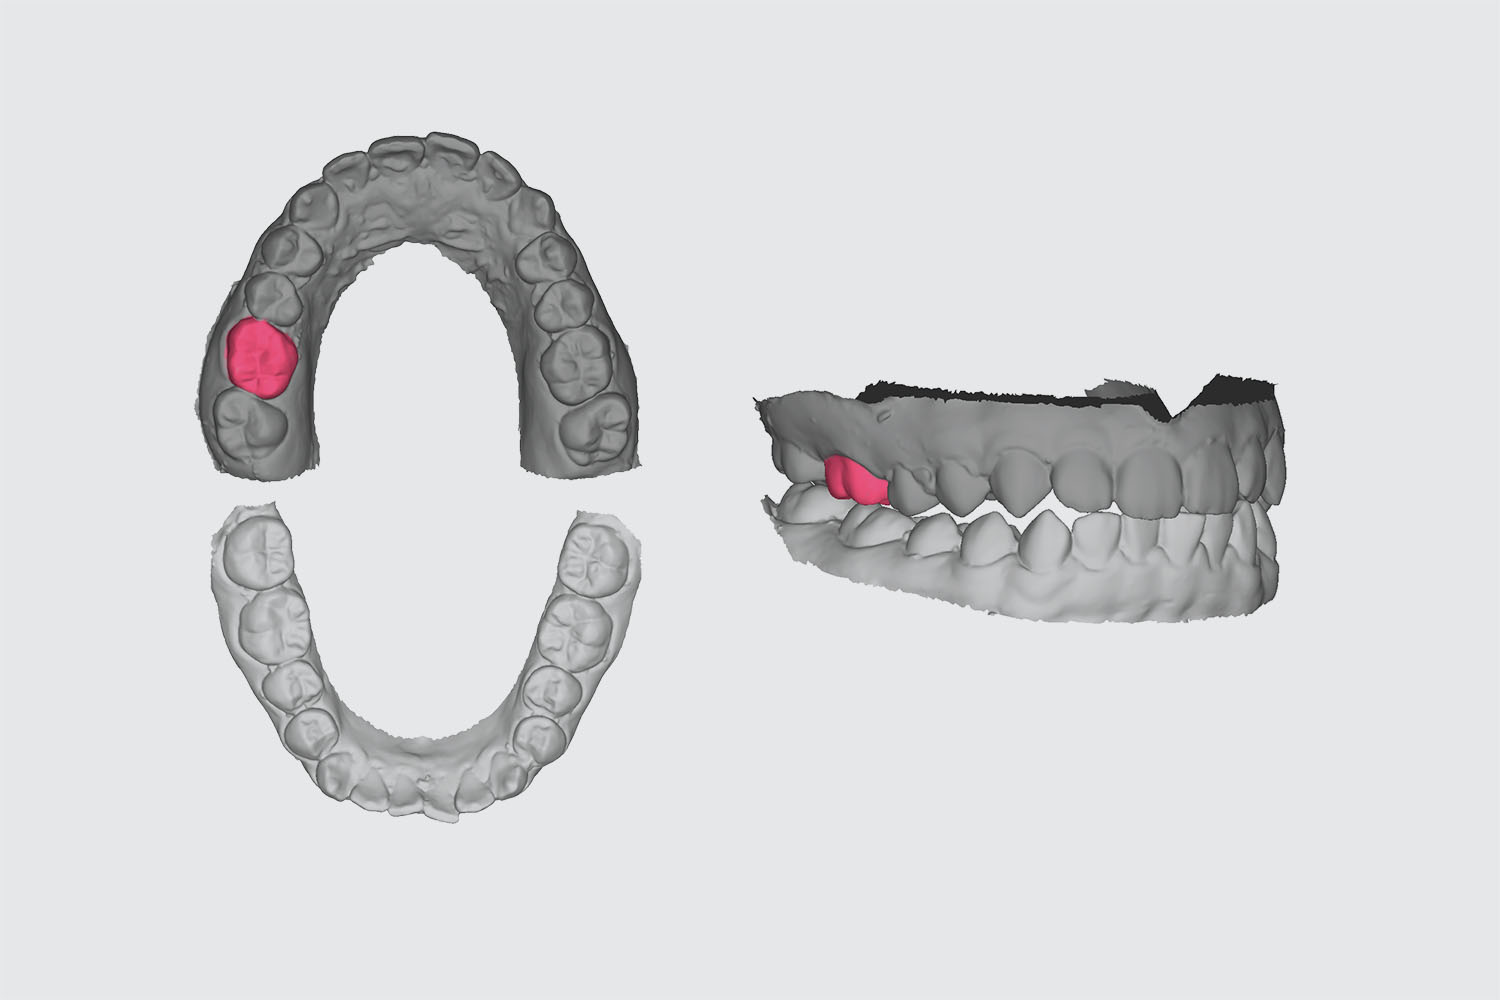 AI Technology to Automate the Process of Denture Design